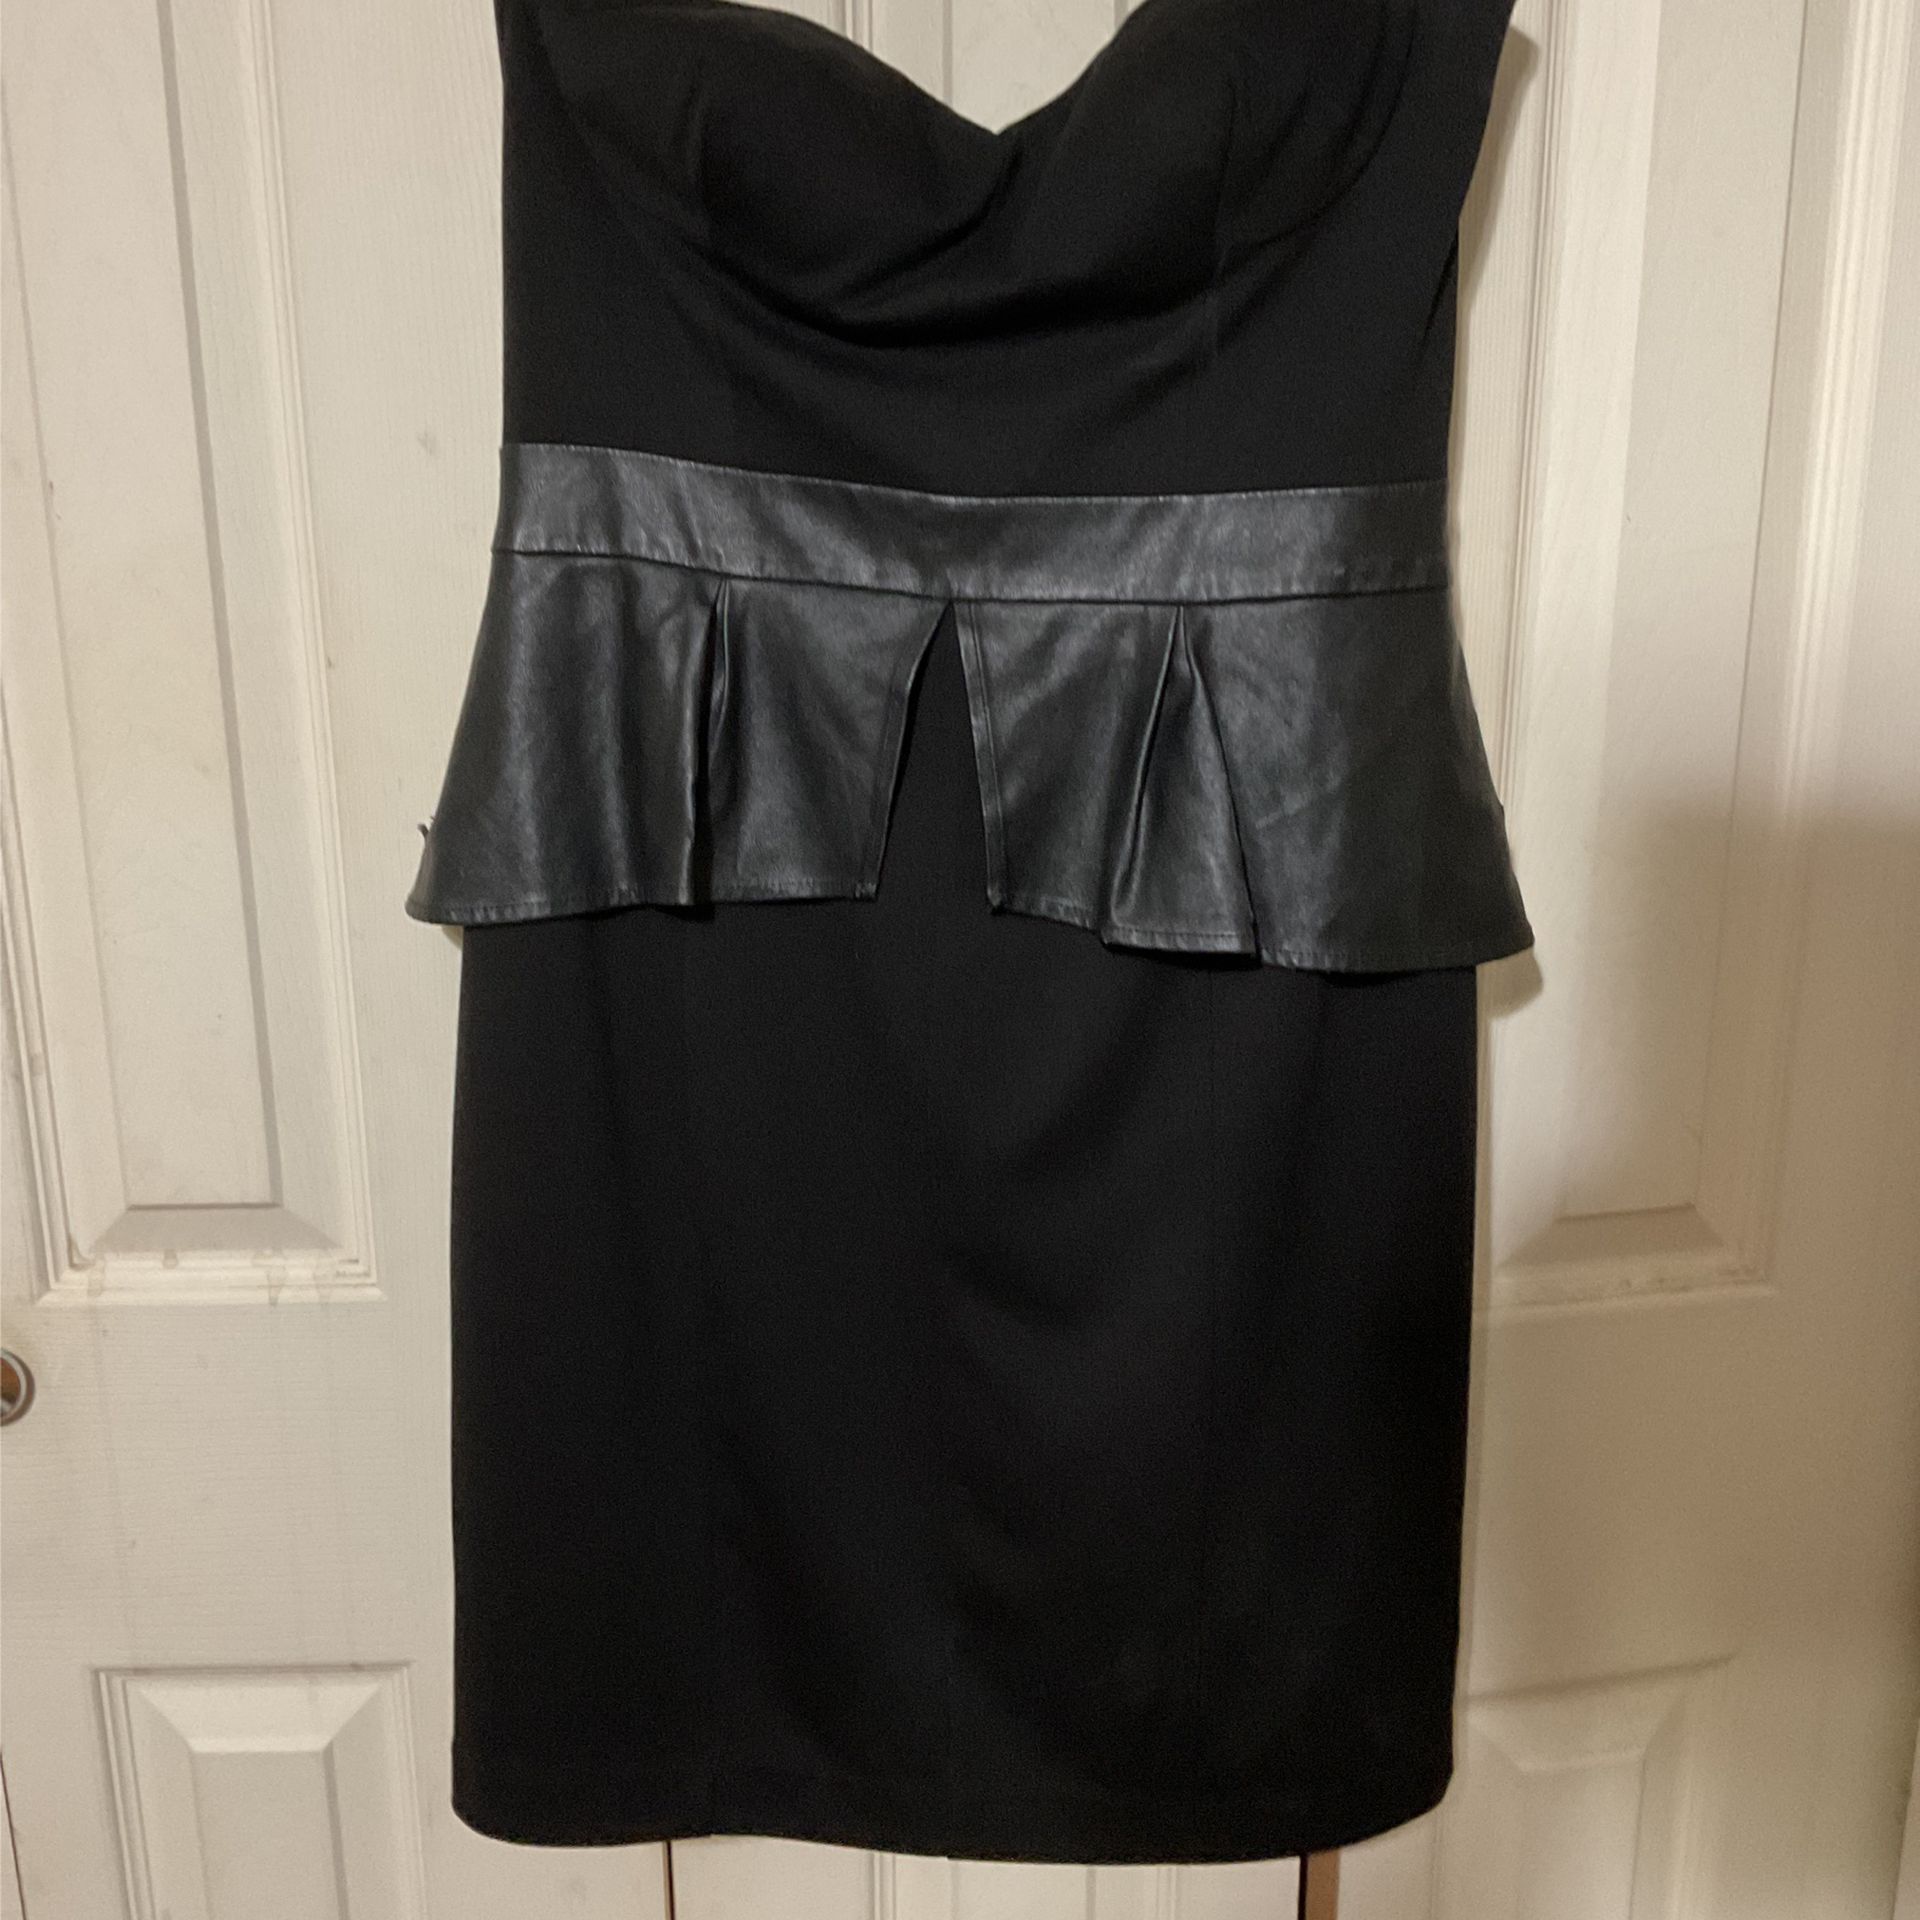 Jessica Simpson Classy Black Dress Leather Detail And Cloth. Great